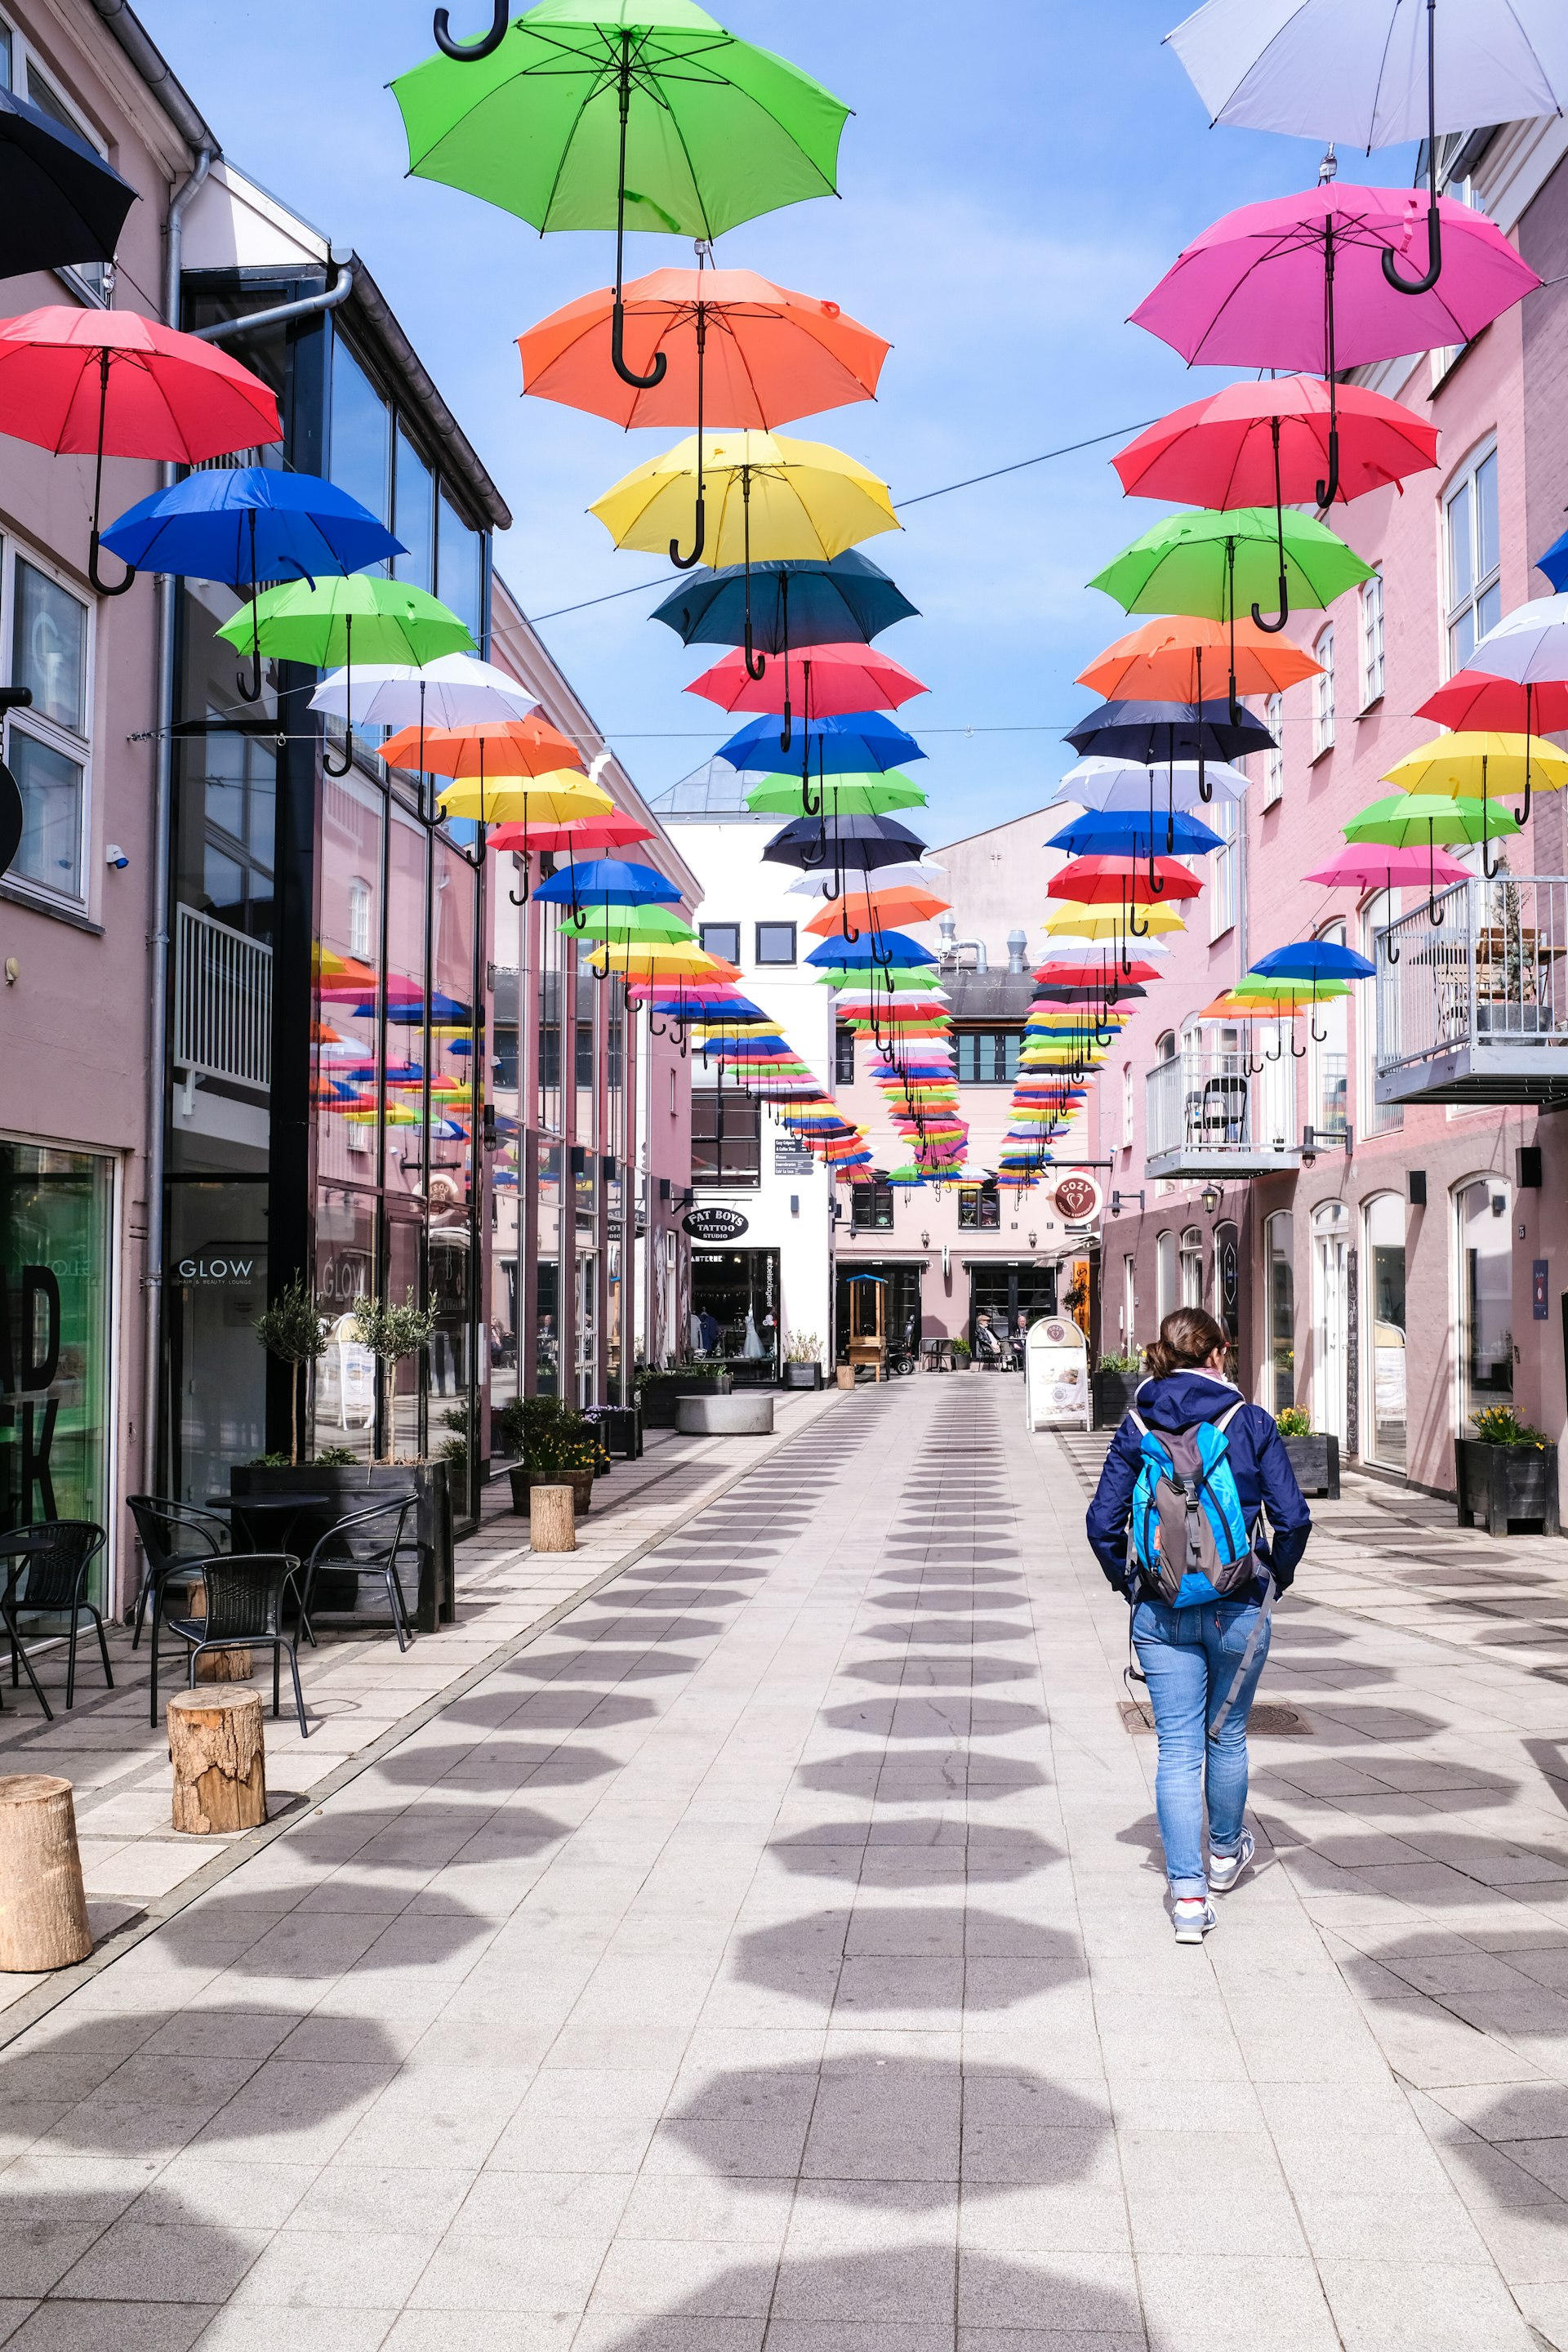 A woman is walking down a pedestrian street in Vejle, Denmark. Brightly coloured umbrellas are hanging overhead and casting octagonal shadows on the street.